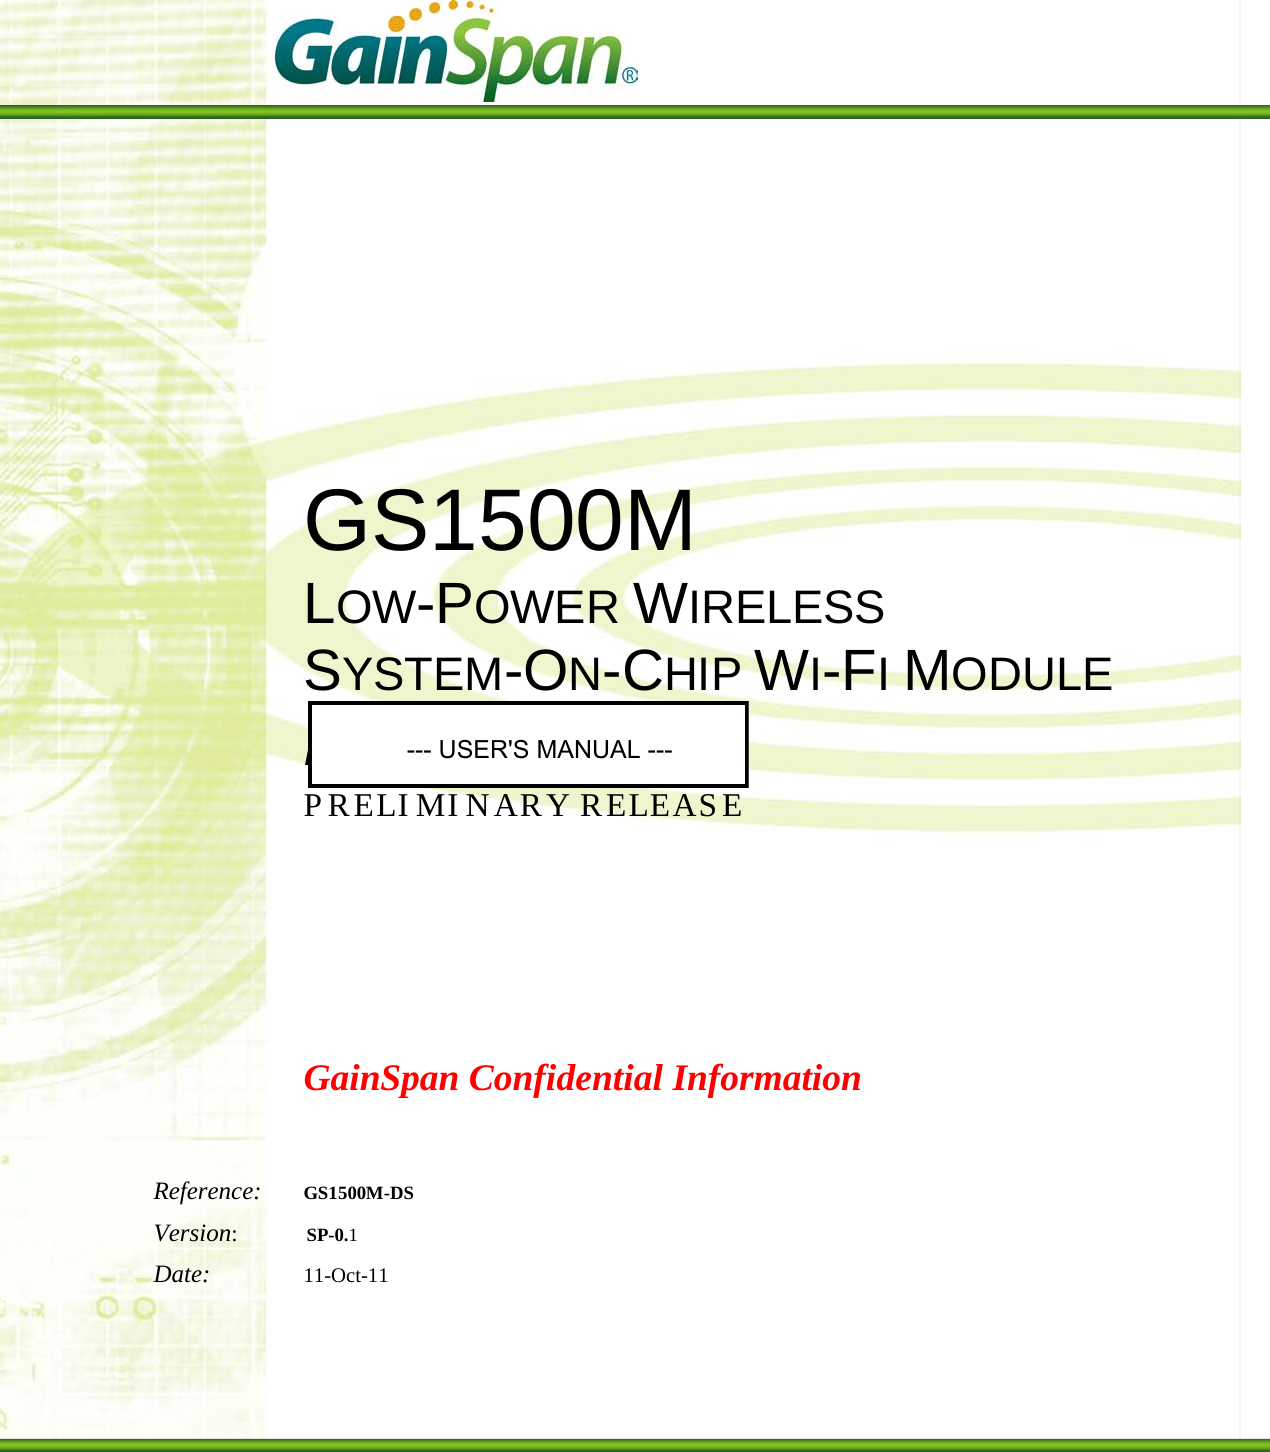                       GS1500M LOW-POWER WIRELESS SYSTEM-ON-CHIP WI-FI MODULE DATA SHEET PRELIMINARY RELEASE        GainSpan Confidential Information  Reference: GS1500M-DS Version:            SP-0.1 Date: 11-Oct-11  USER MANUAL- USER MANUAL              USER&apos;S MANUAL 